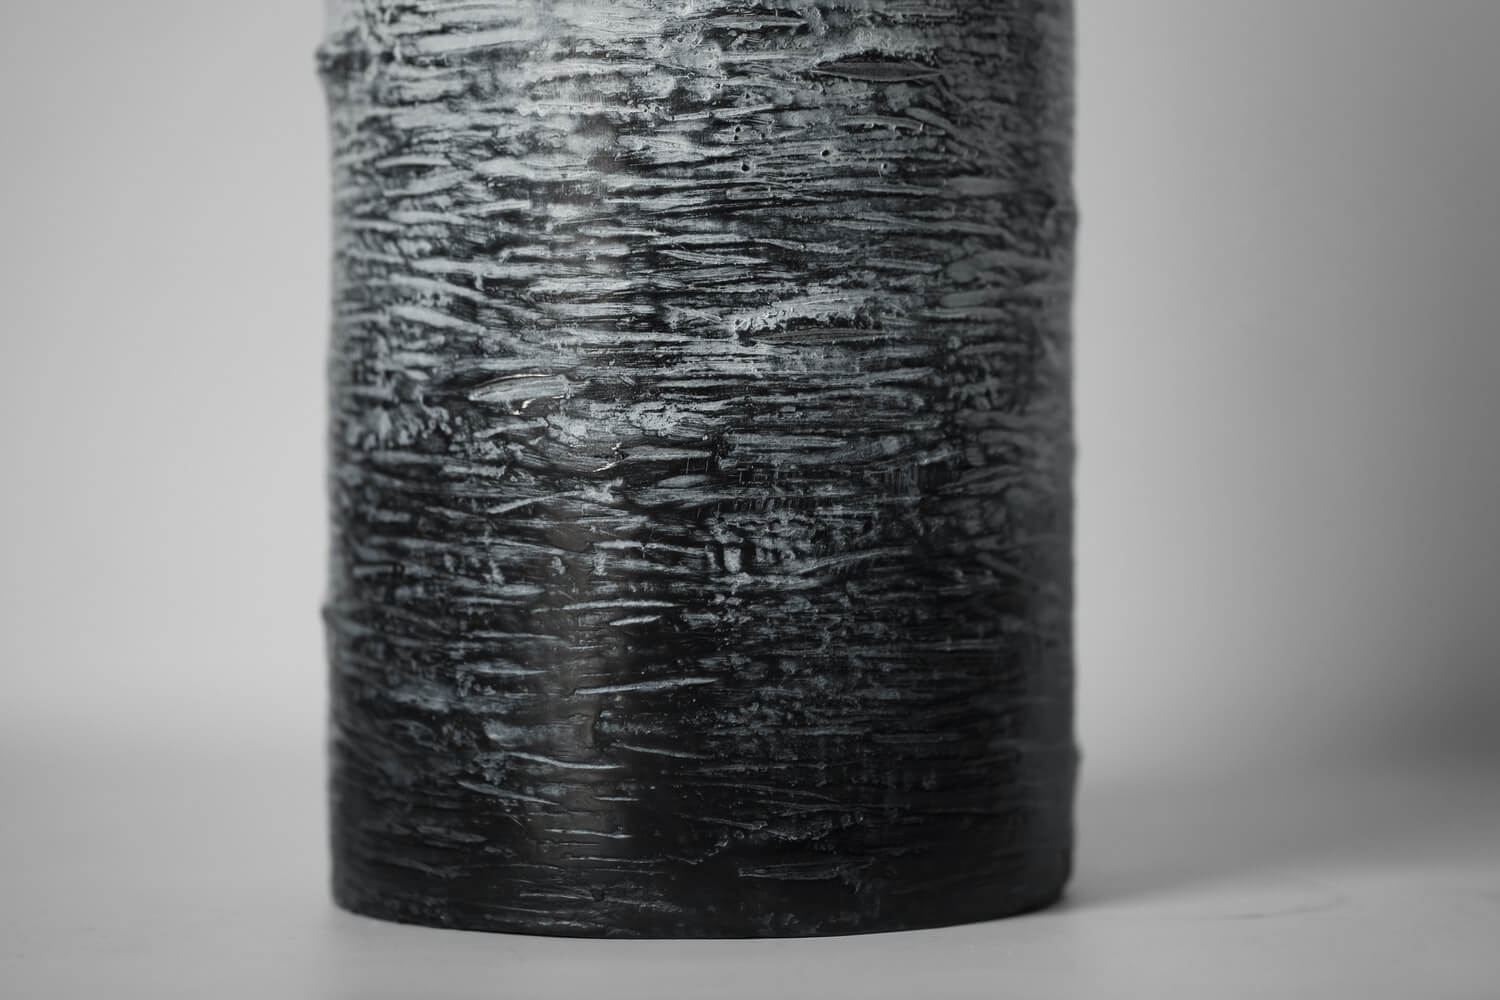 The bottom of a textured cylindrical vase with a white gradient from the top transitioning to black.